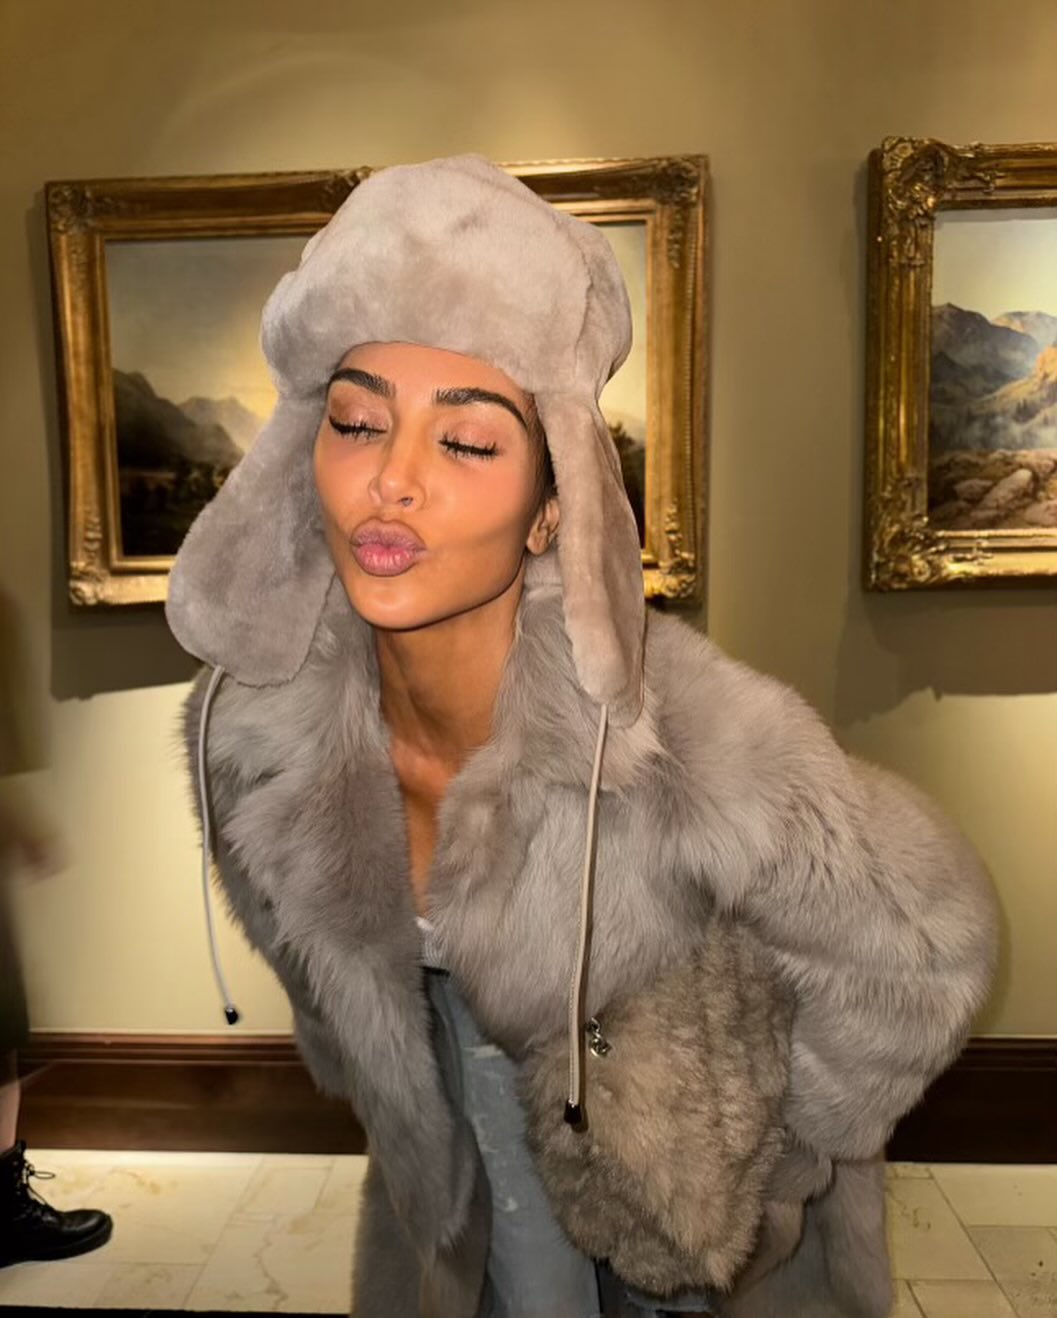 Kim posed in a furry hat while on a snowy vacation